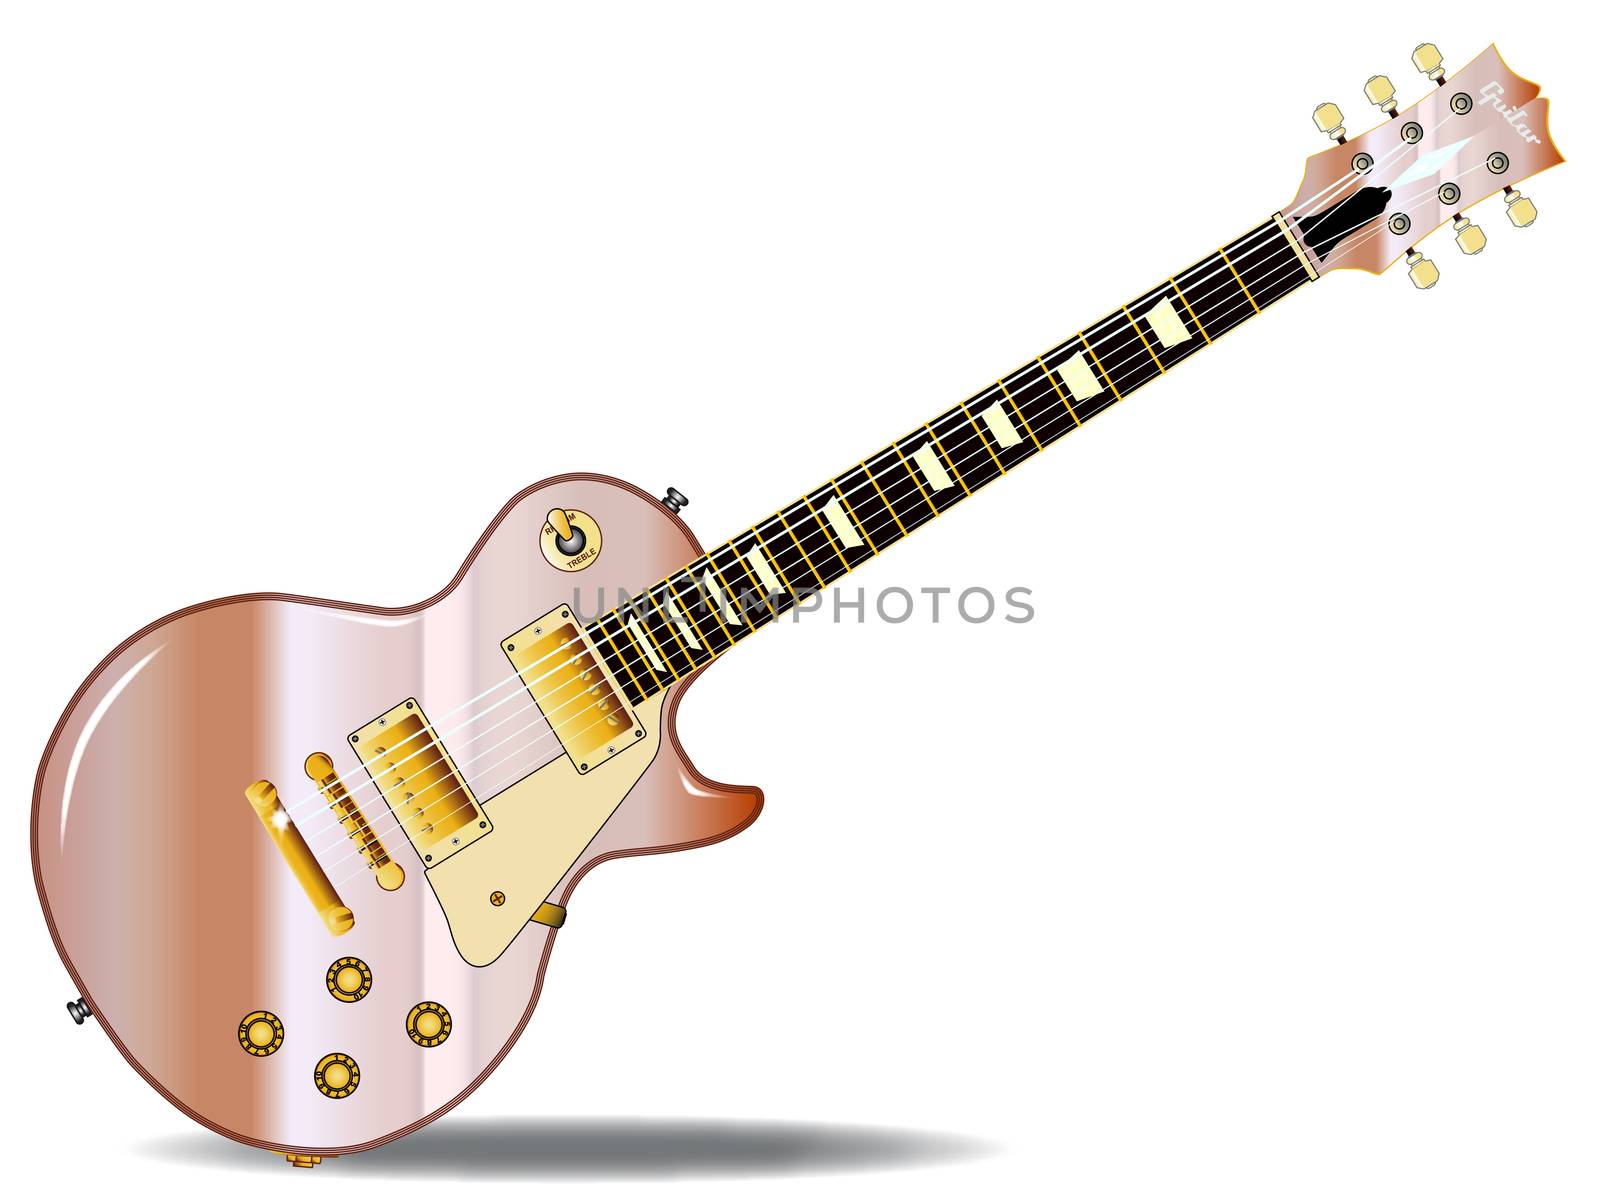 The definitive rock and roll guitar in metal pink isolated over a white background.